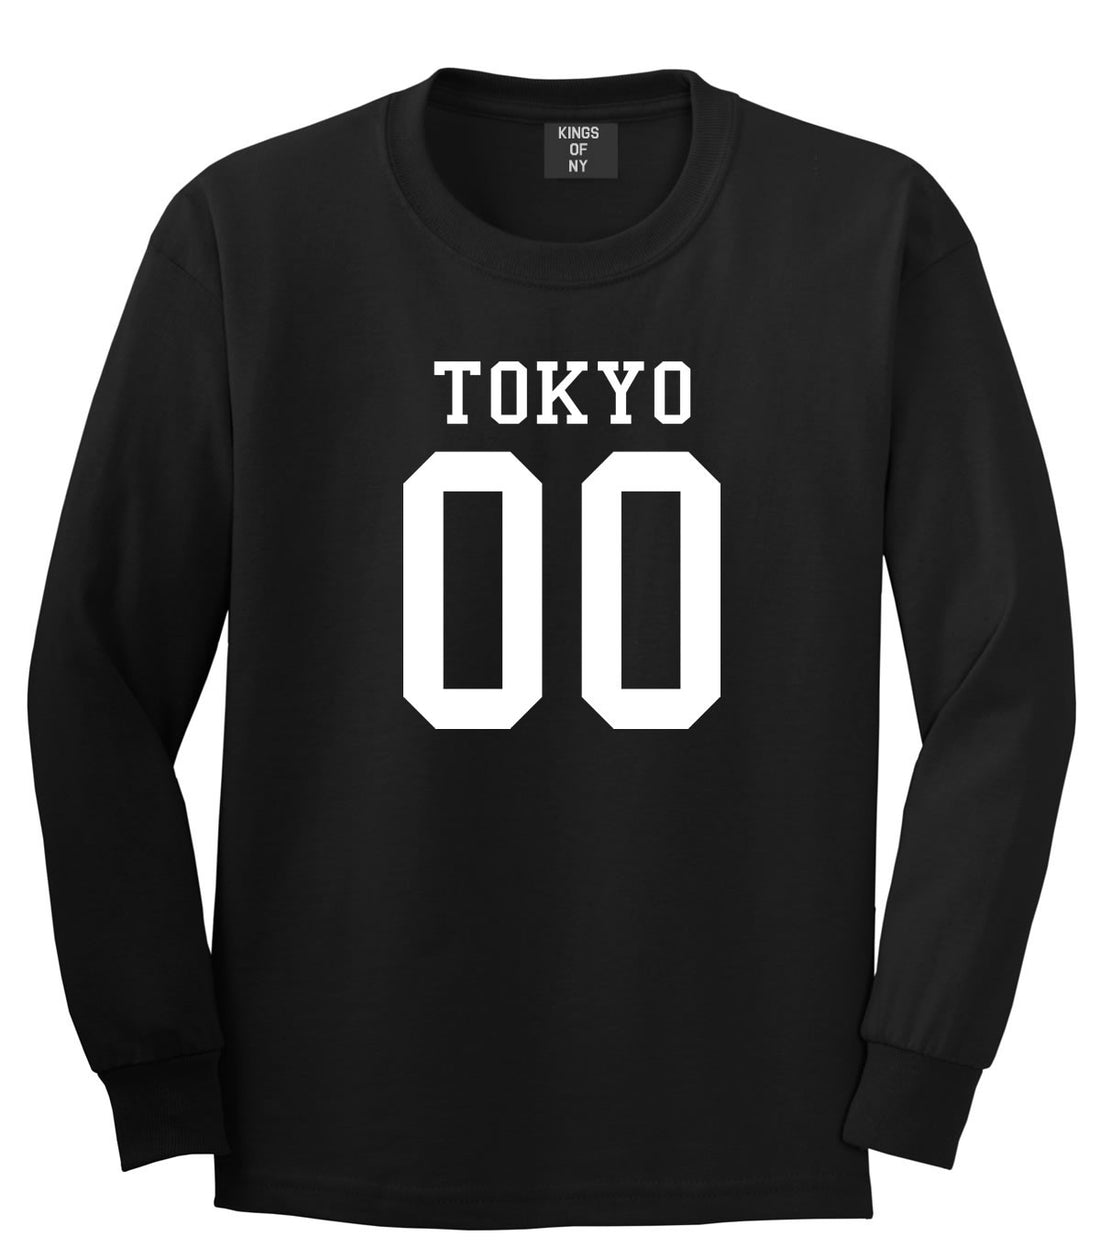 Tokyo Team 00 Jersey Japan Long Sleeve T-Shirt in Black By Kings Of NY